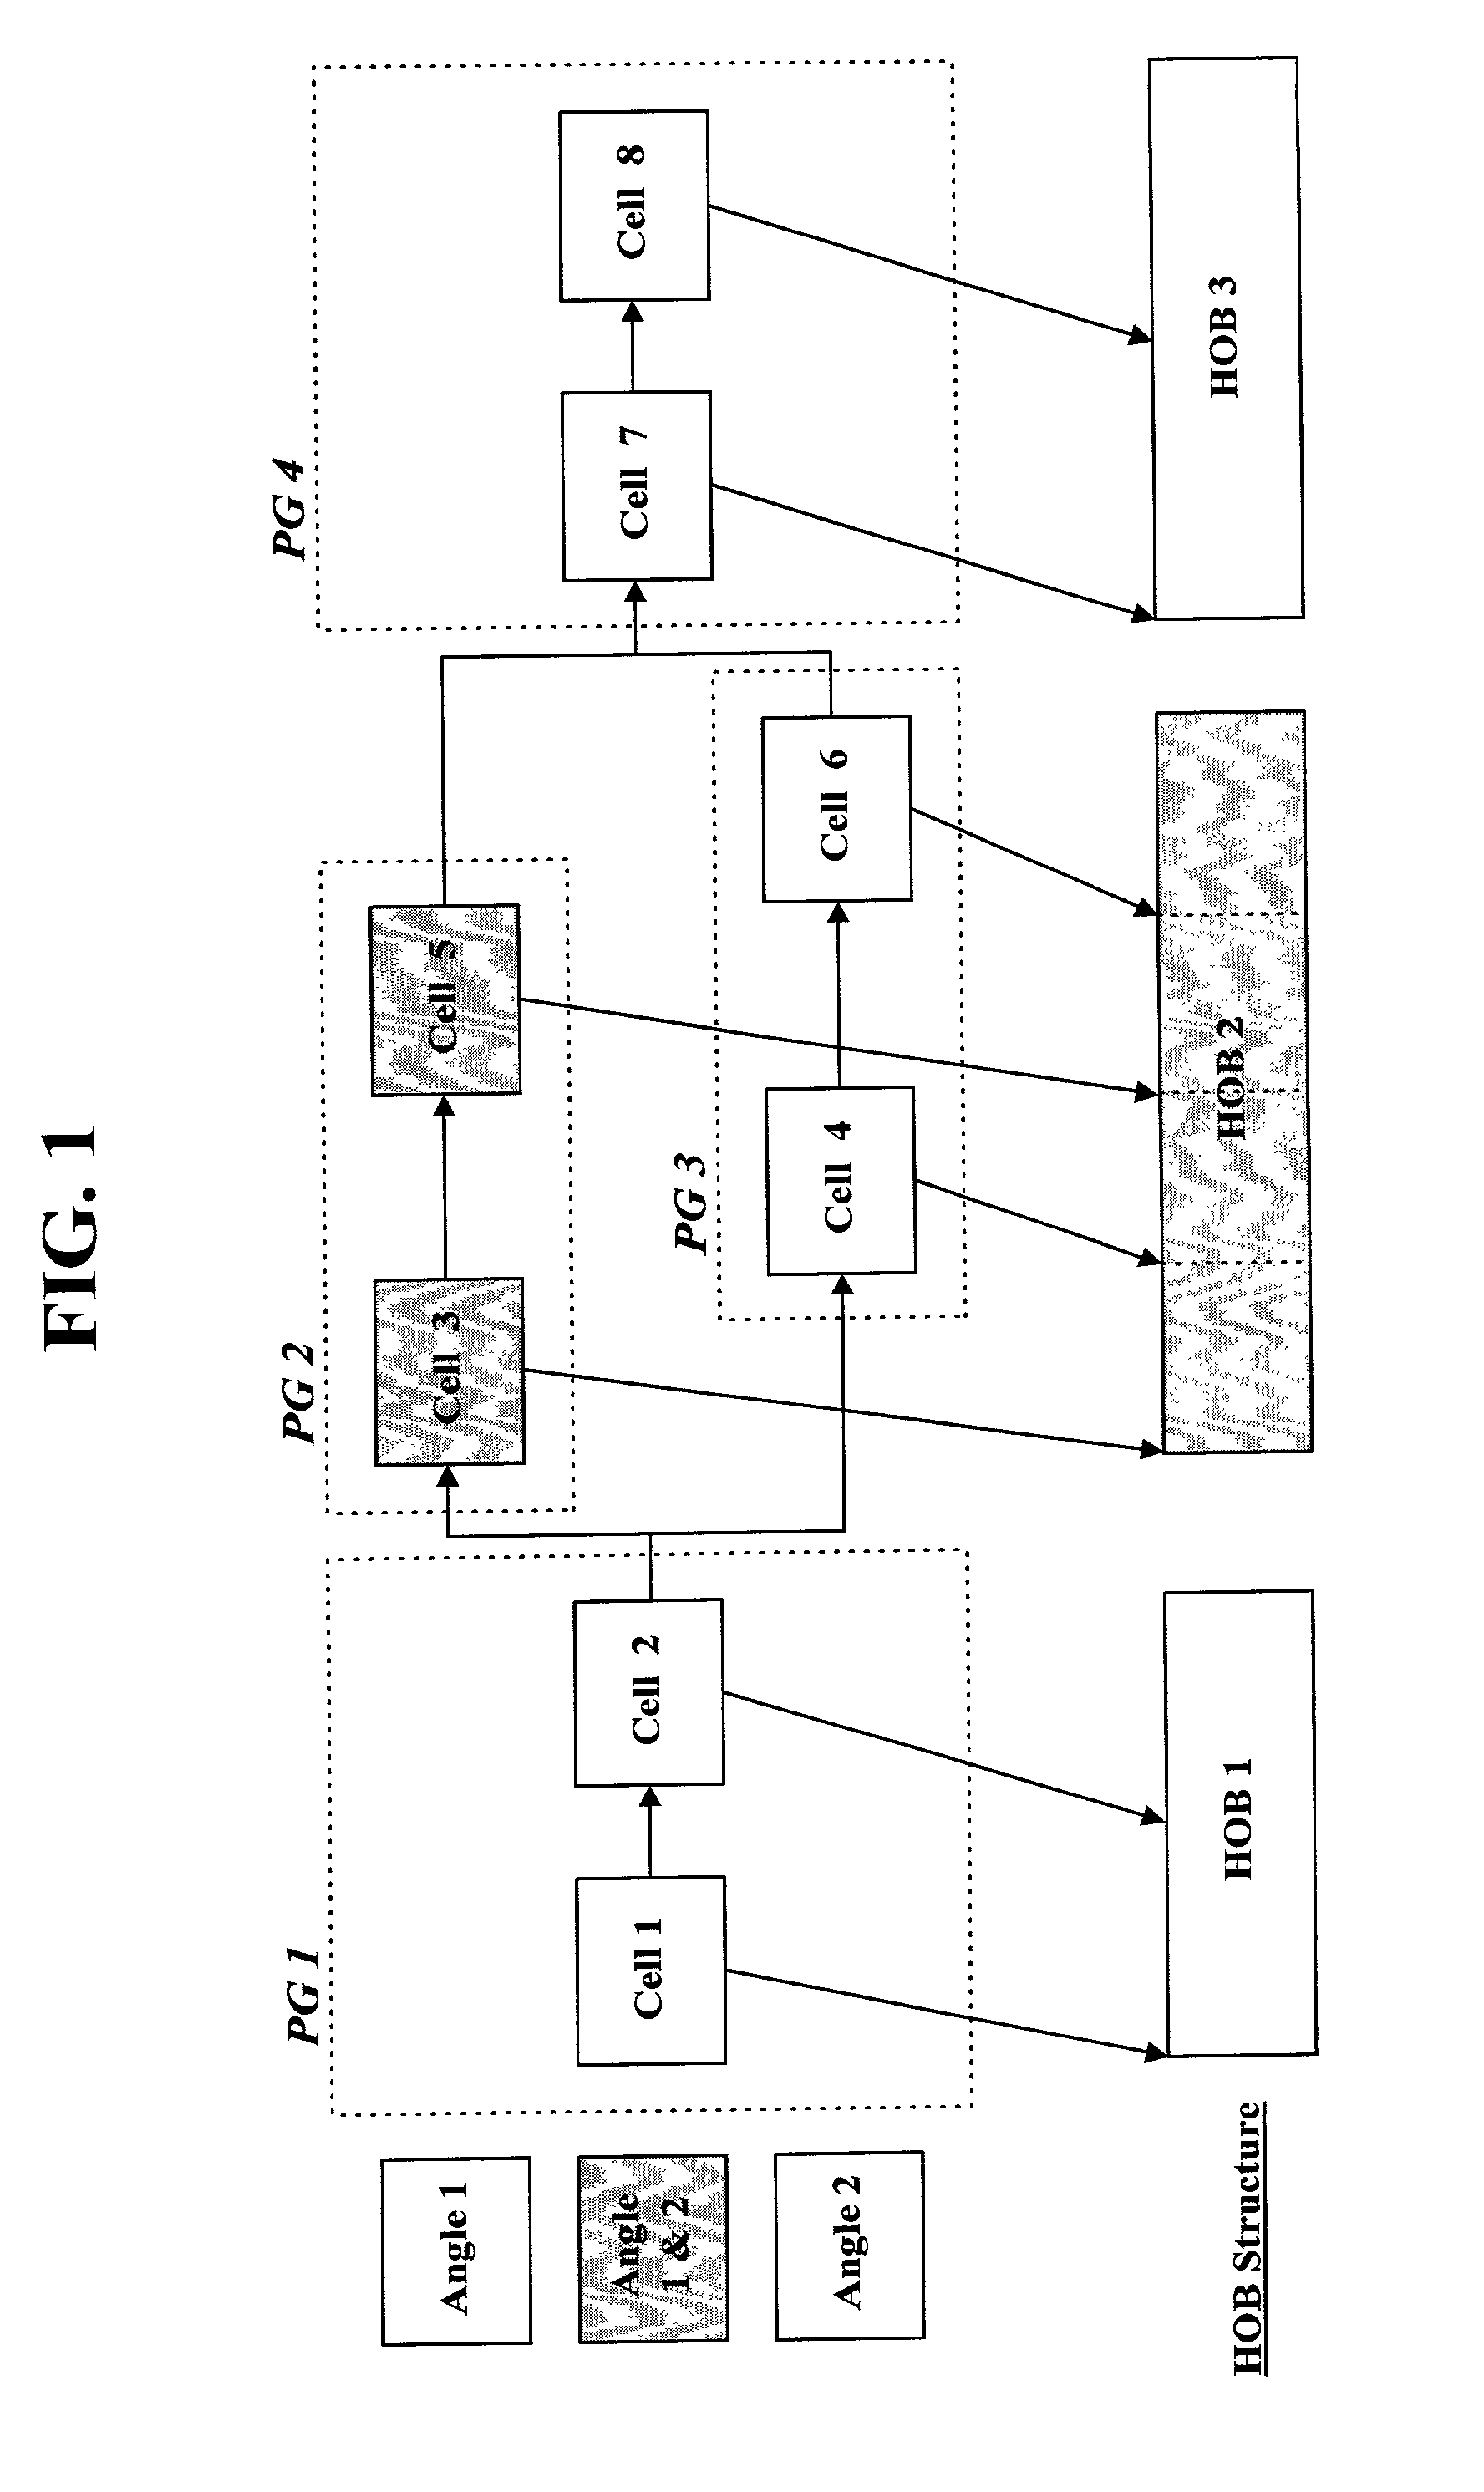 Method for making multi-path data stream acceptable in a high-density recording medium